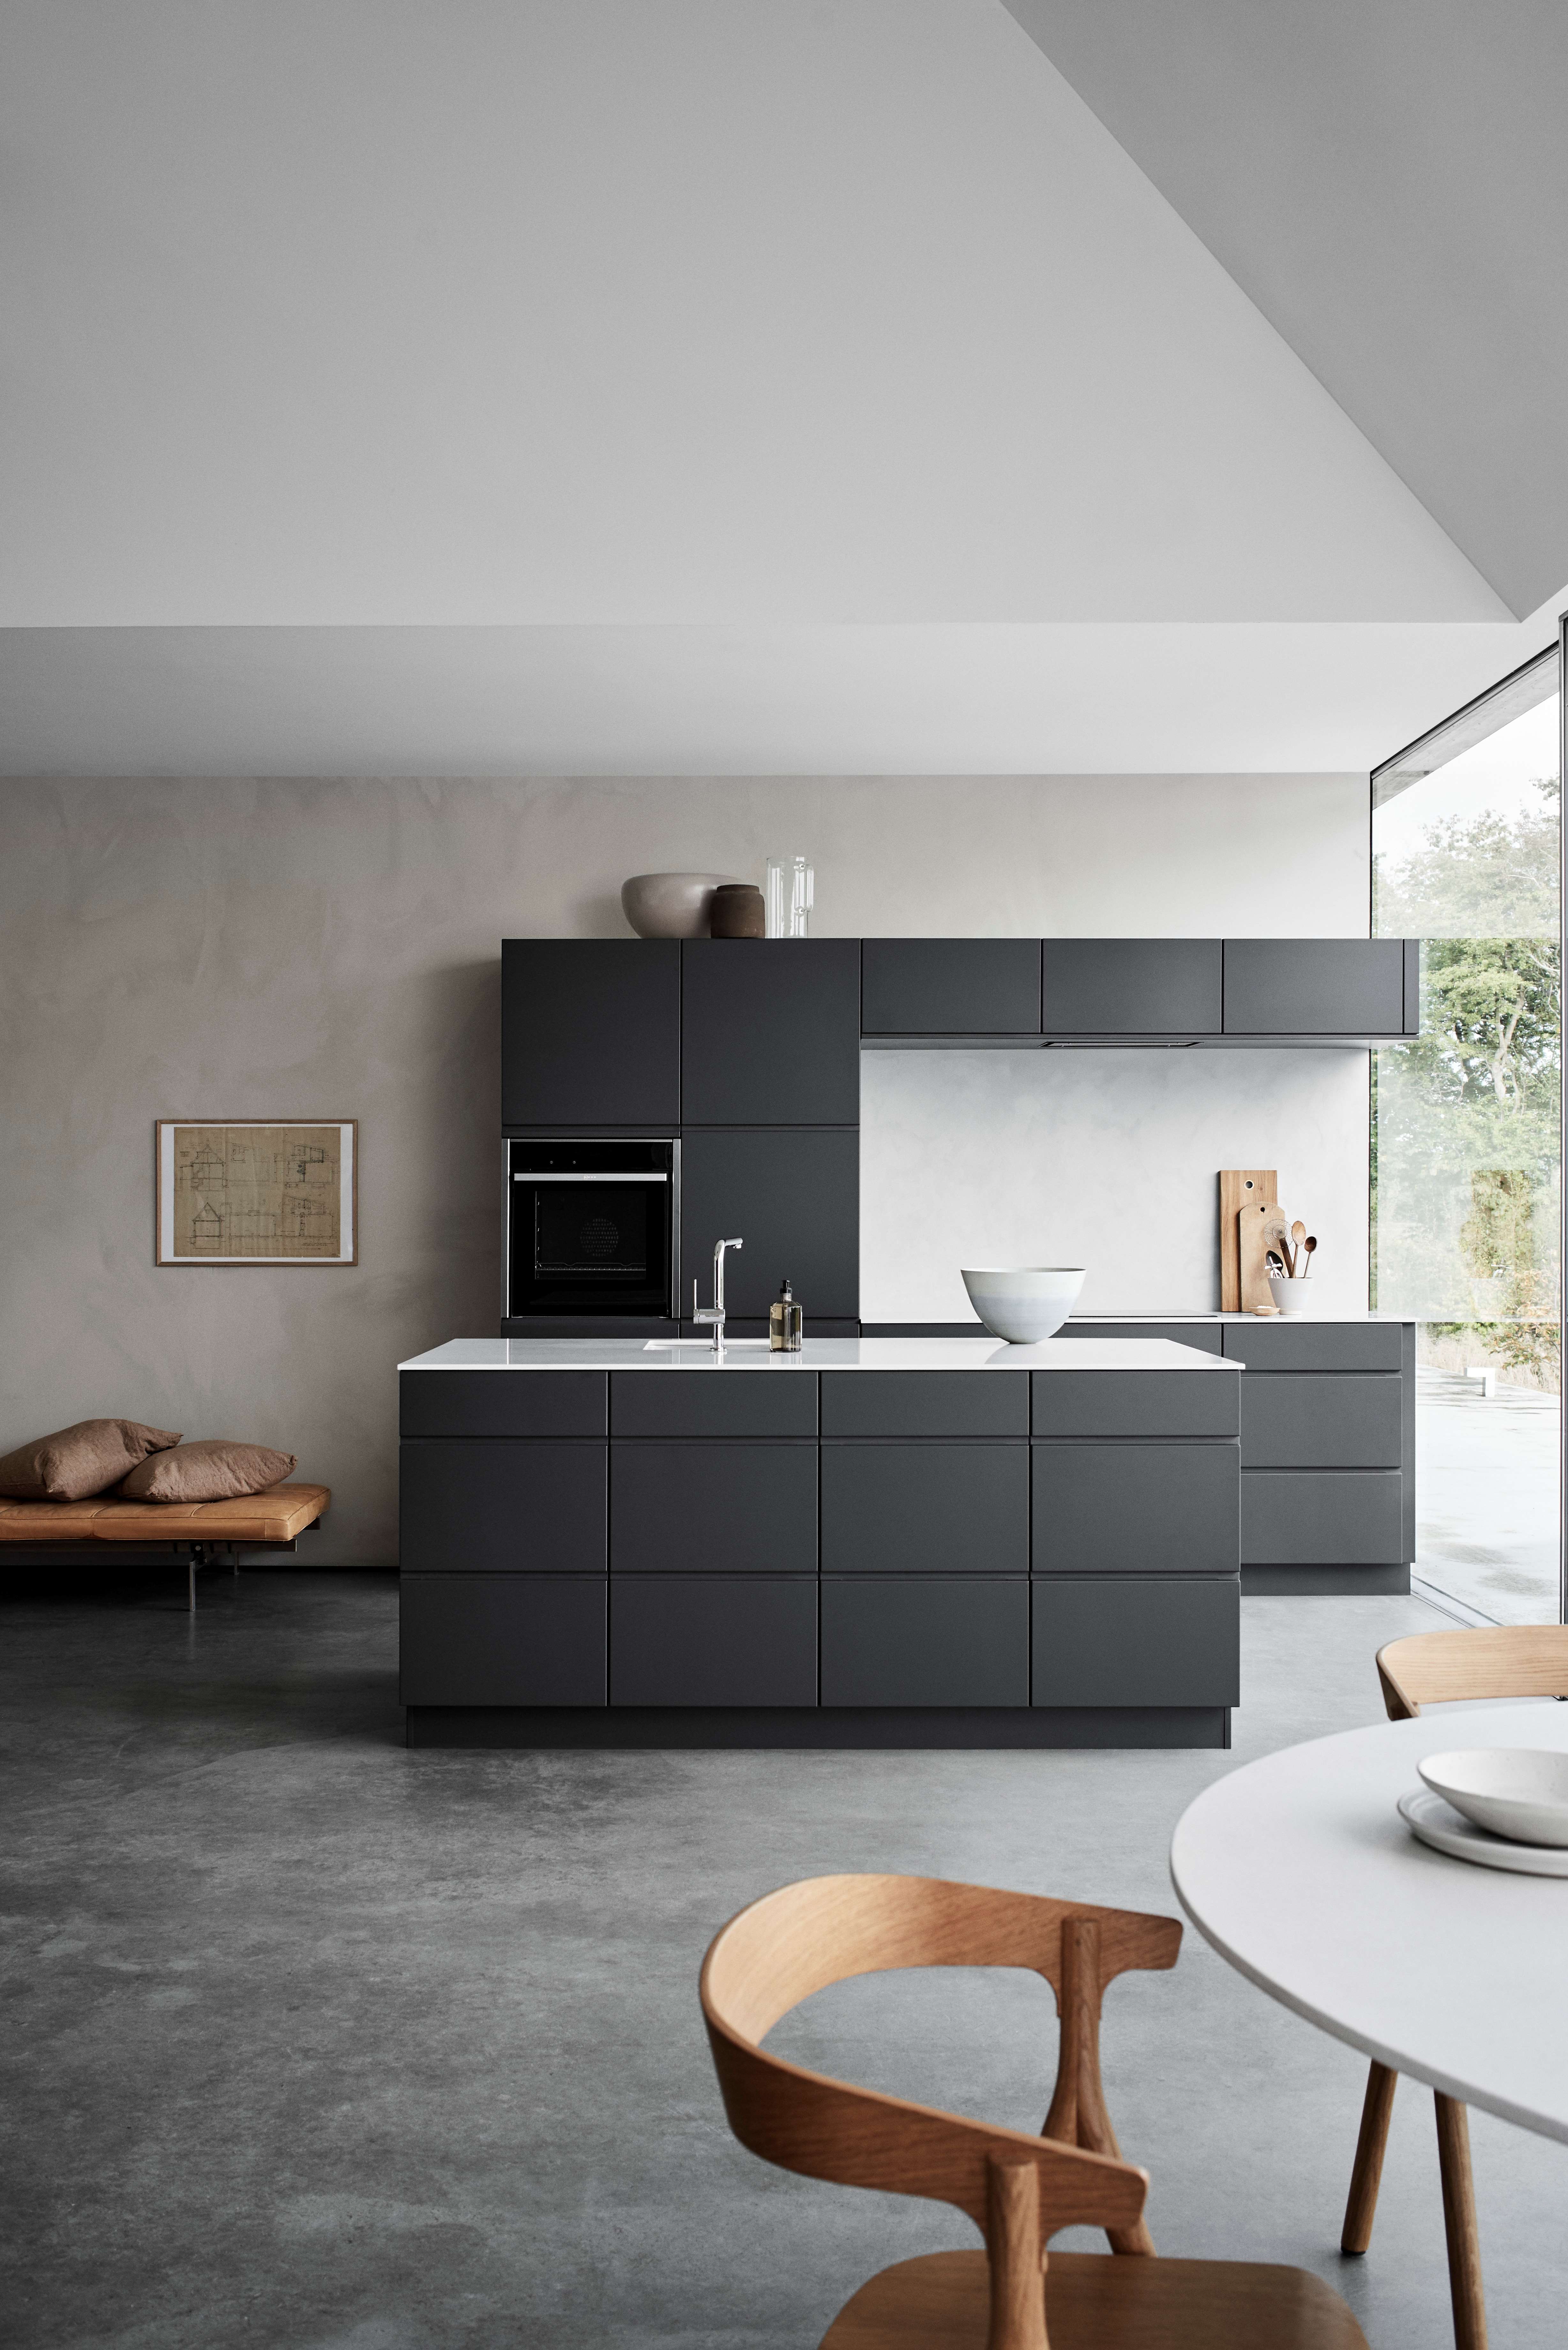 Black kitchen with kitchen island and colored black fronts